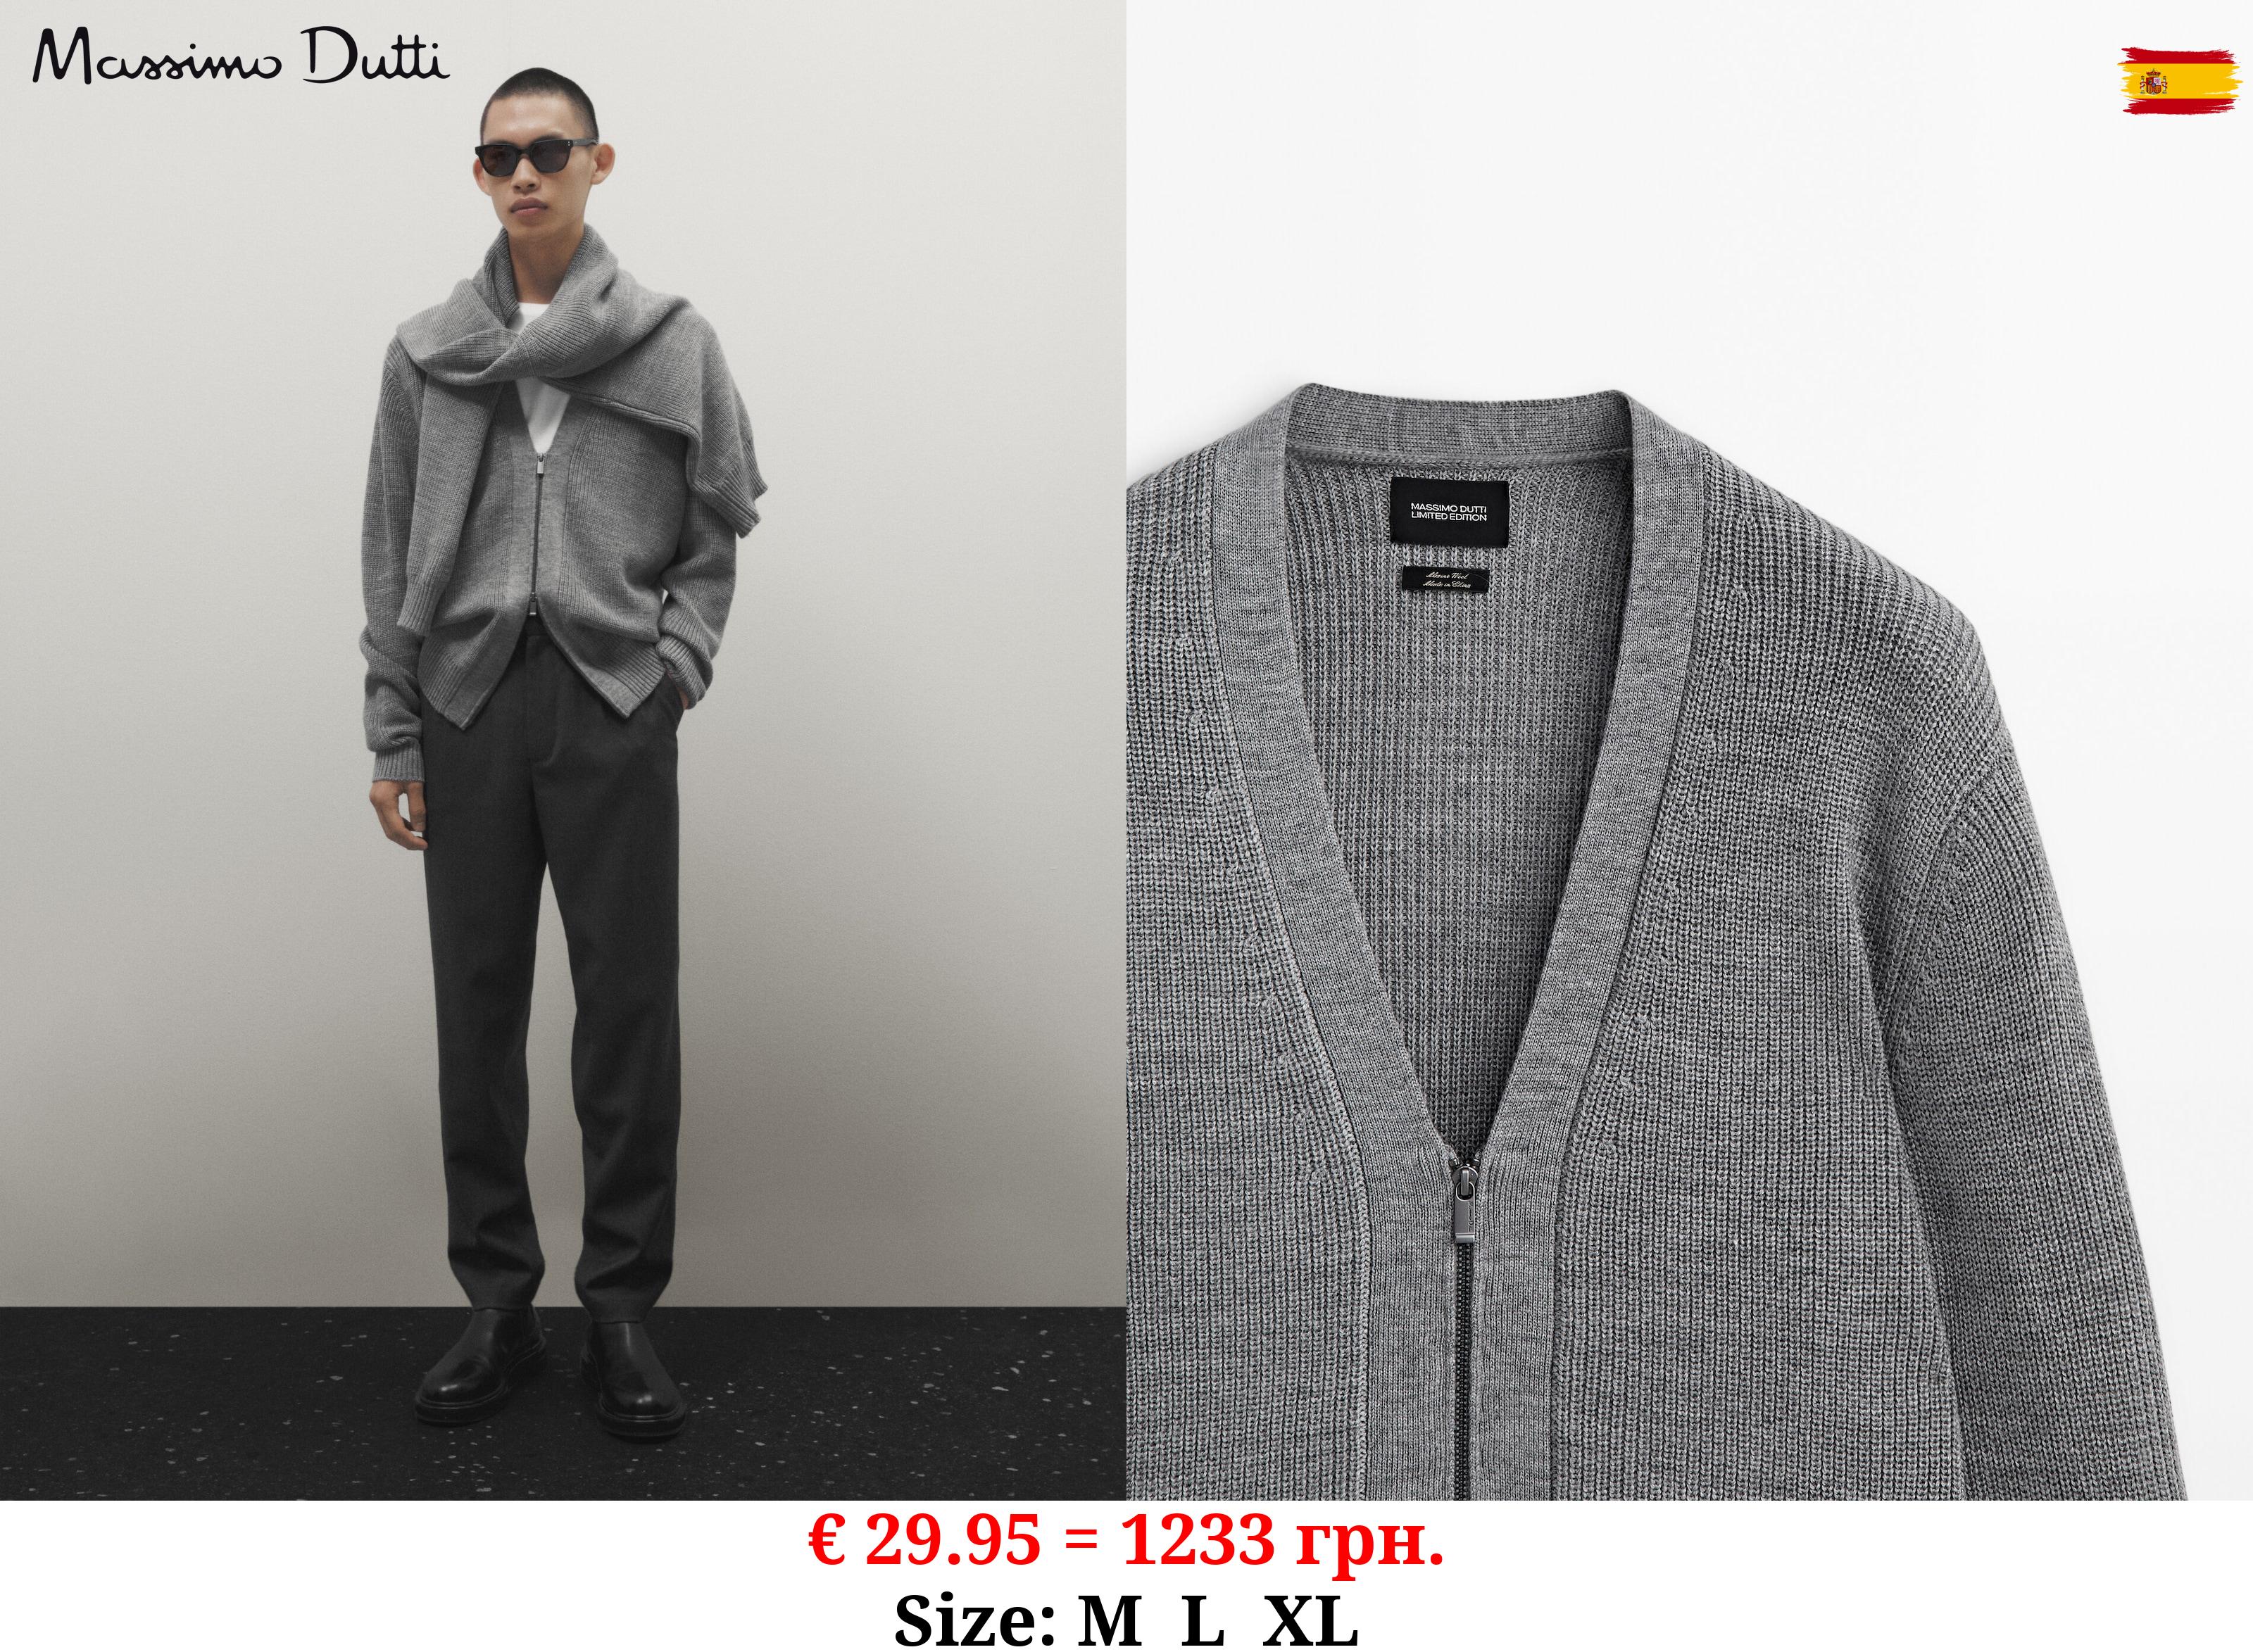 Knit cardigan with zip - Limited Edition ANTHRACITE GREY